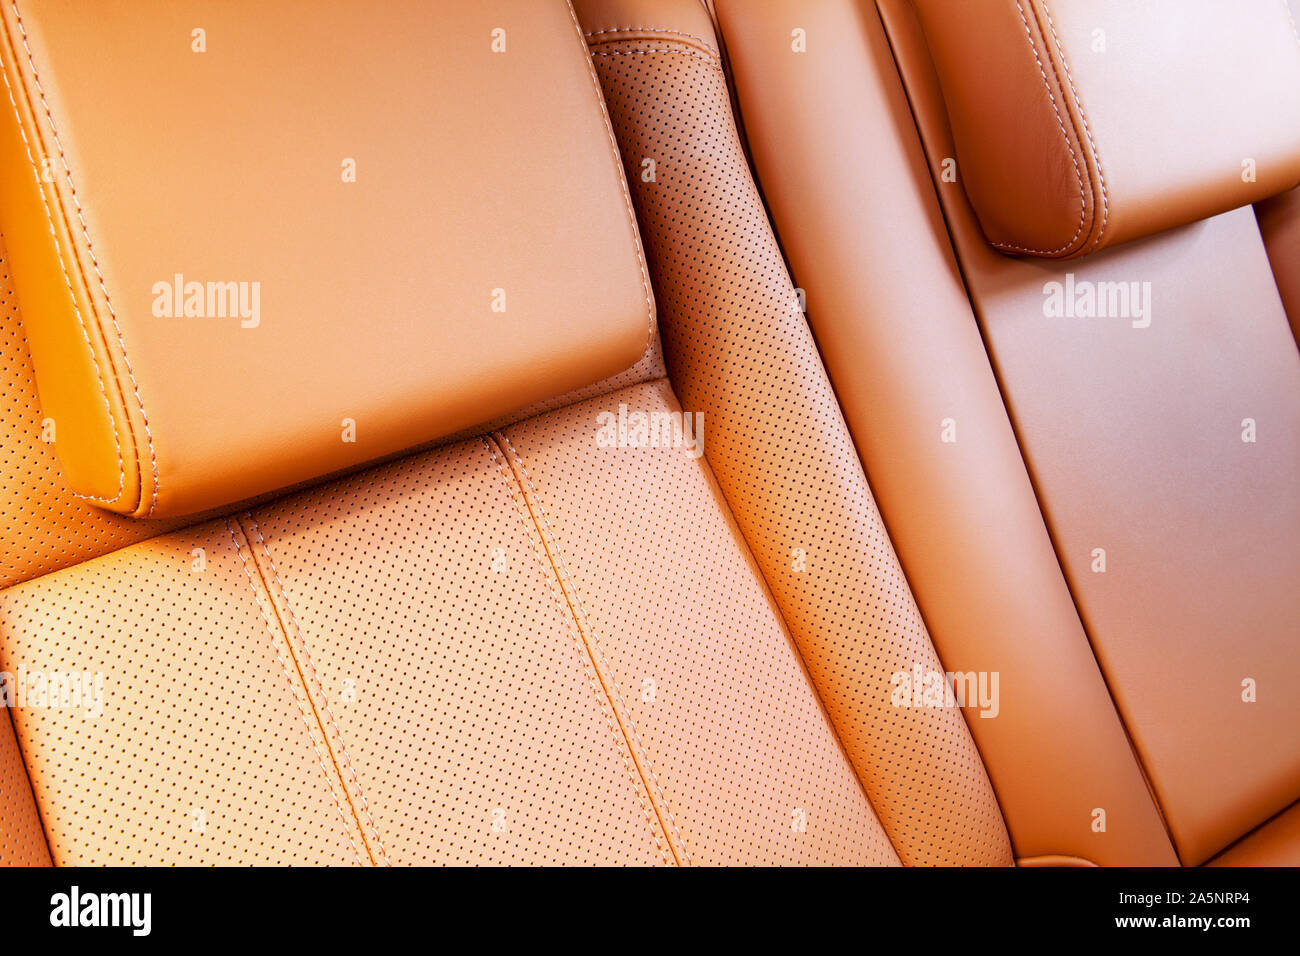 car seat in perforated leather Stock Photo